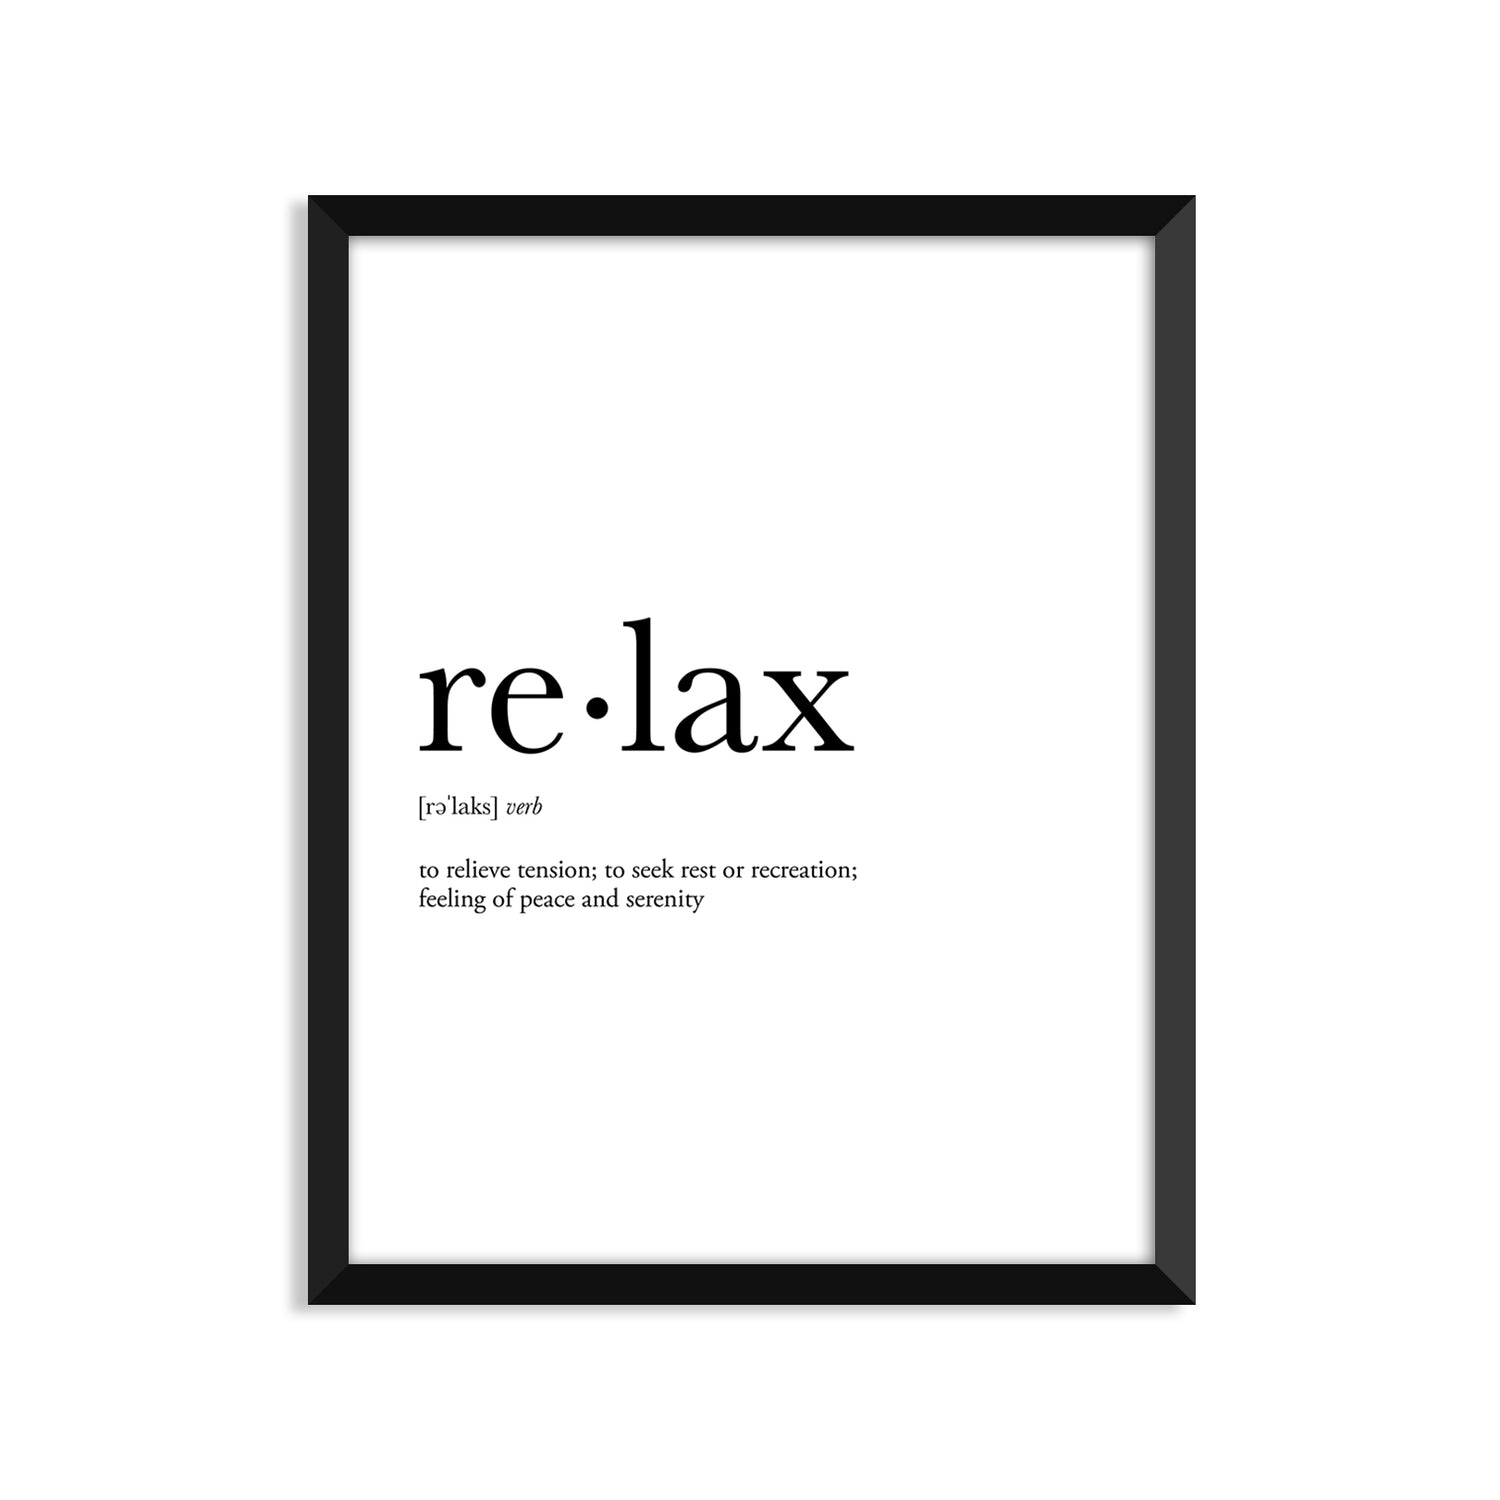 Relax Definition - Unframed Art Print Or Greeting Card